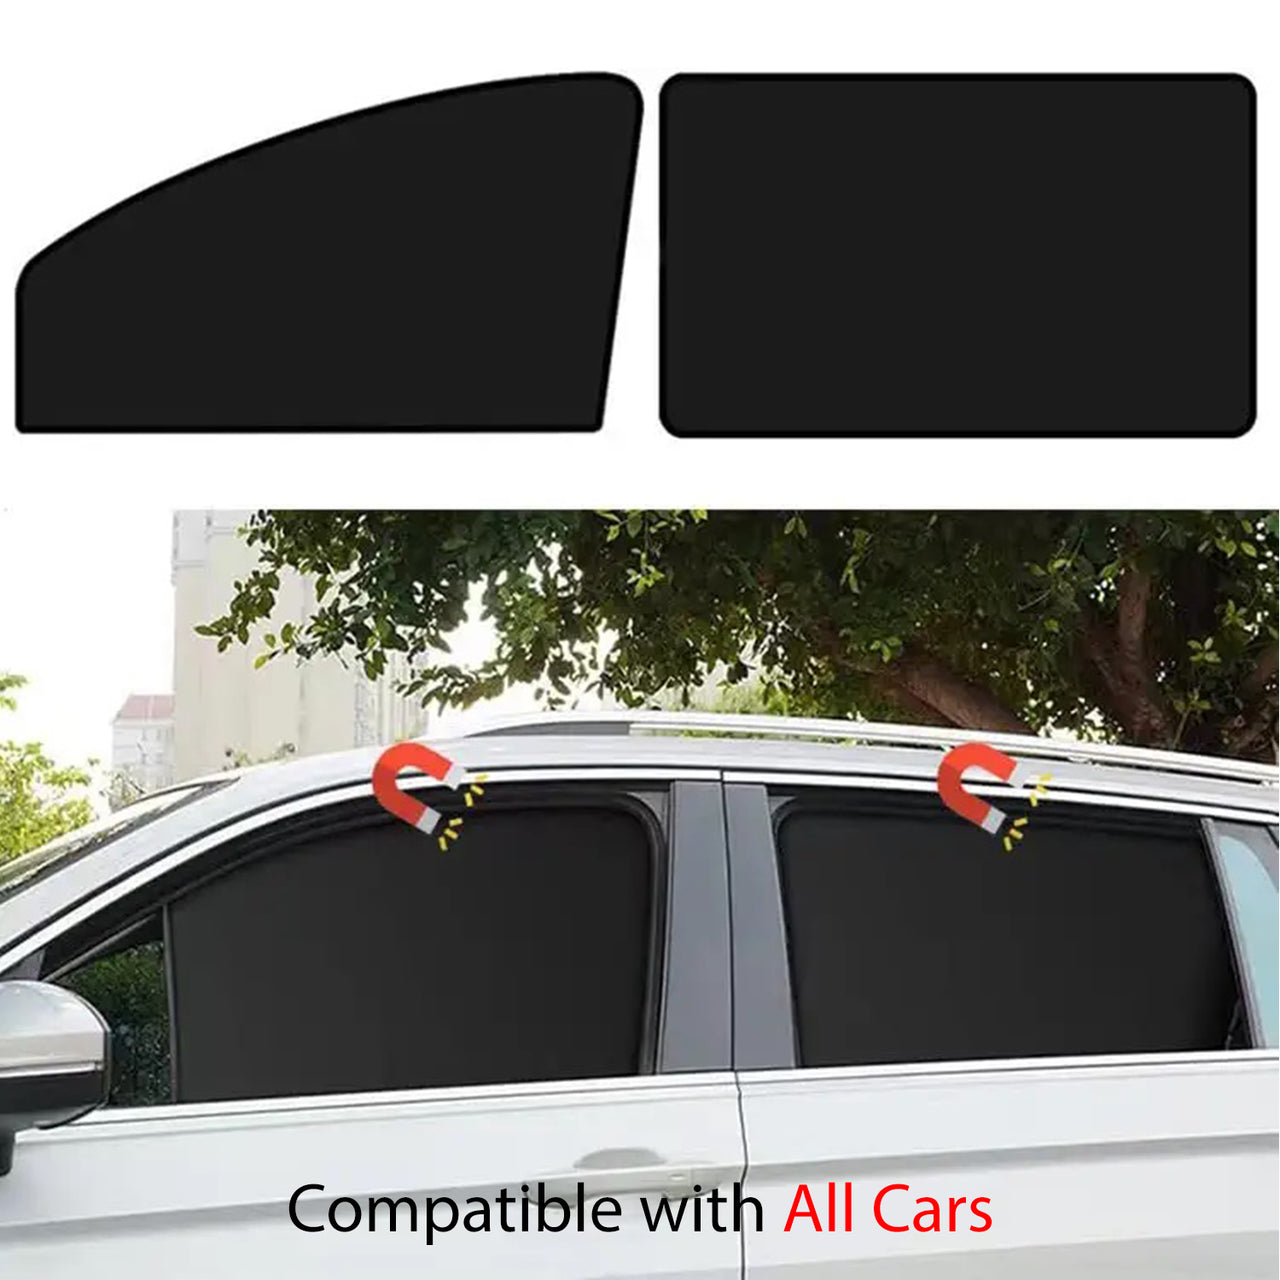 Car Side Window Sun Shades, Custom Fit For Your Cars, Window Sunshades Privacy Curtains, 100% Block Light for Breastfeeding, Taking a nap, Changing Clothes, Camping JG15980